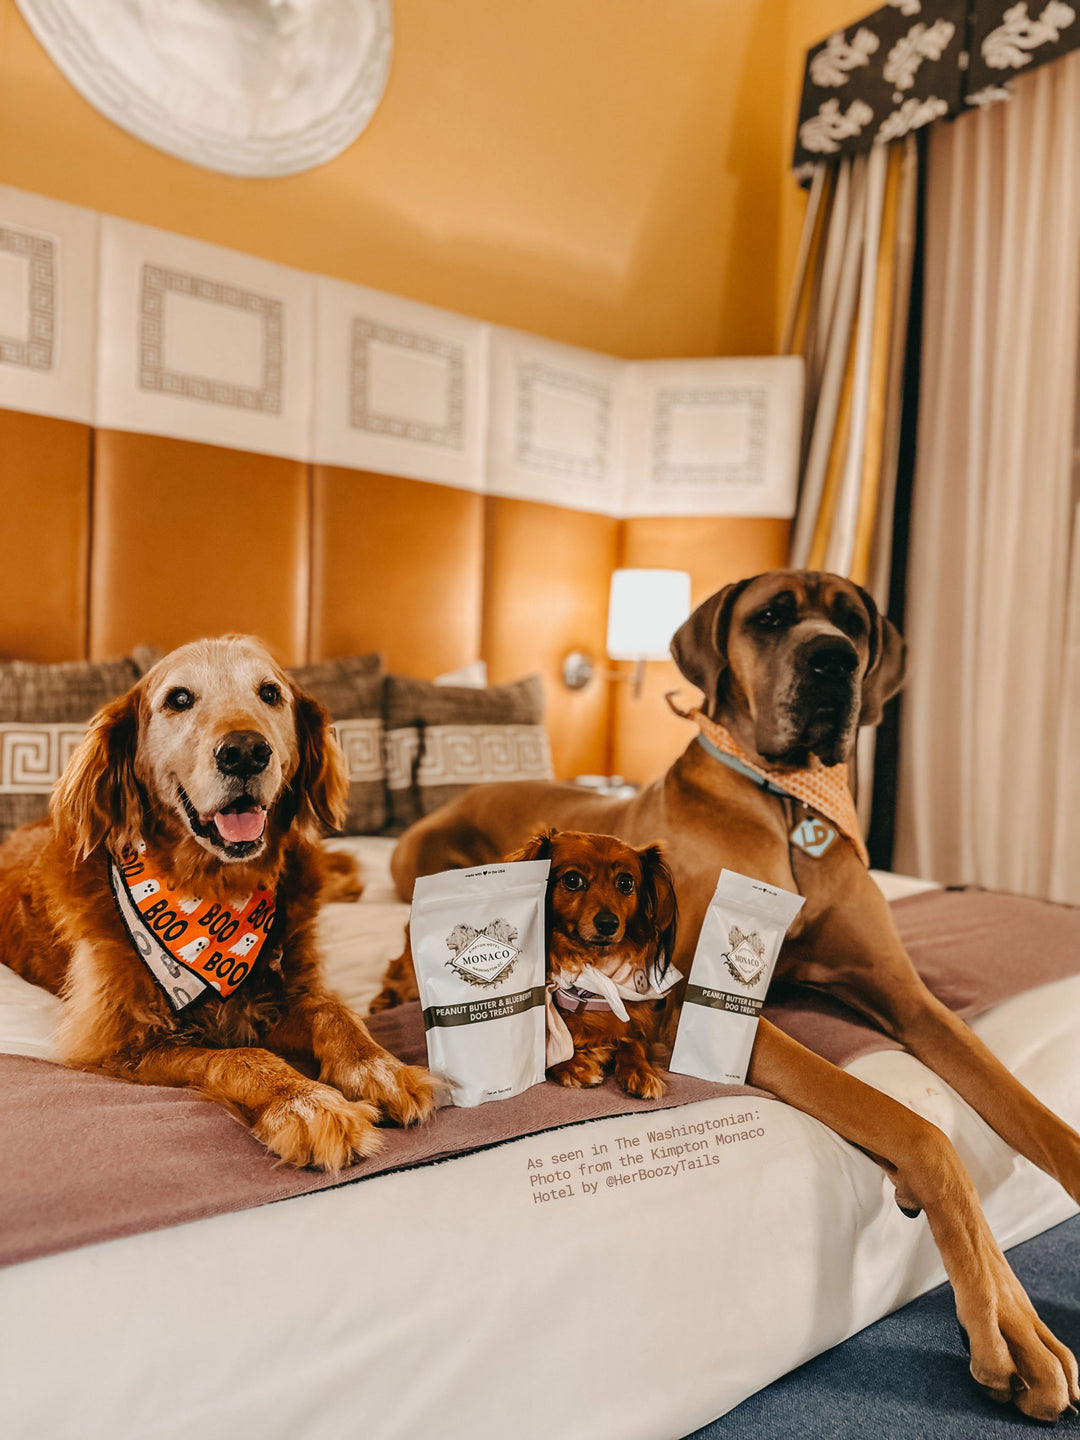 As seen in The Washingtonian: Photo from the Kimpton Monaco Hotel by @HerBoozyTails